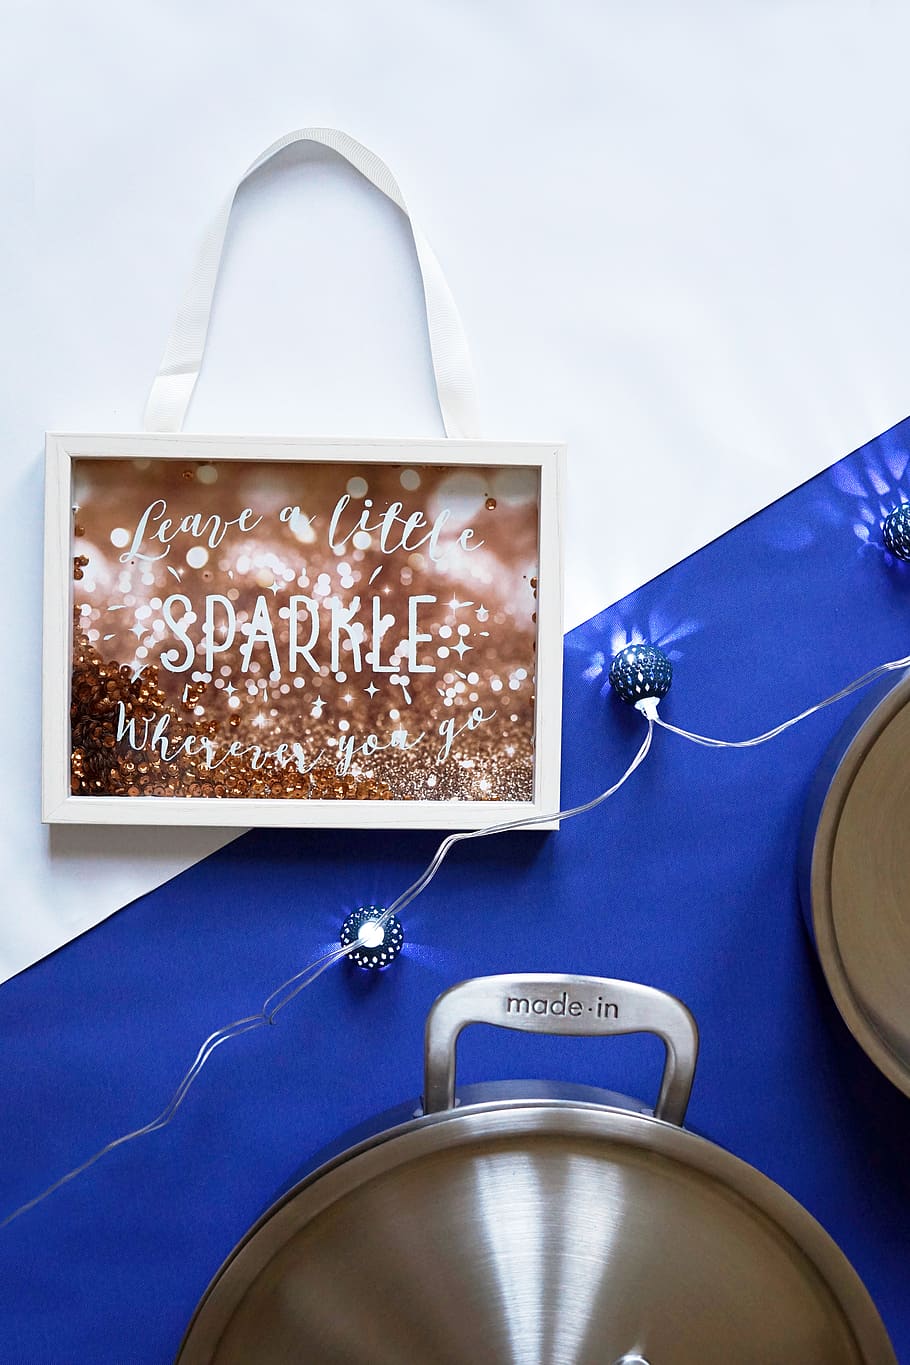 united kingdom, christmas quotes, sparkle, flatlay, blue, cookware